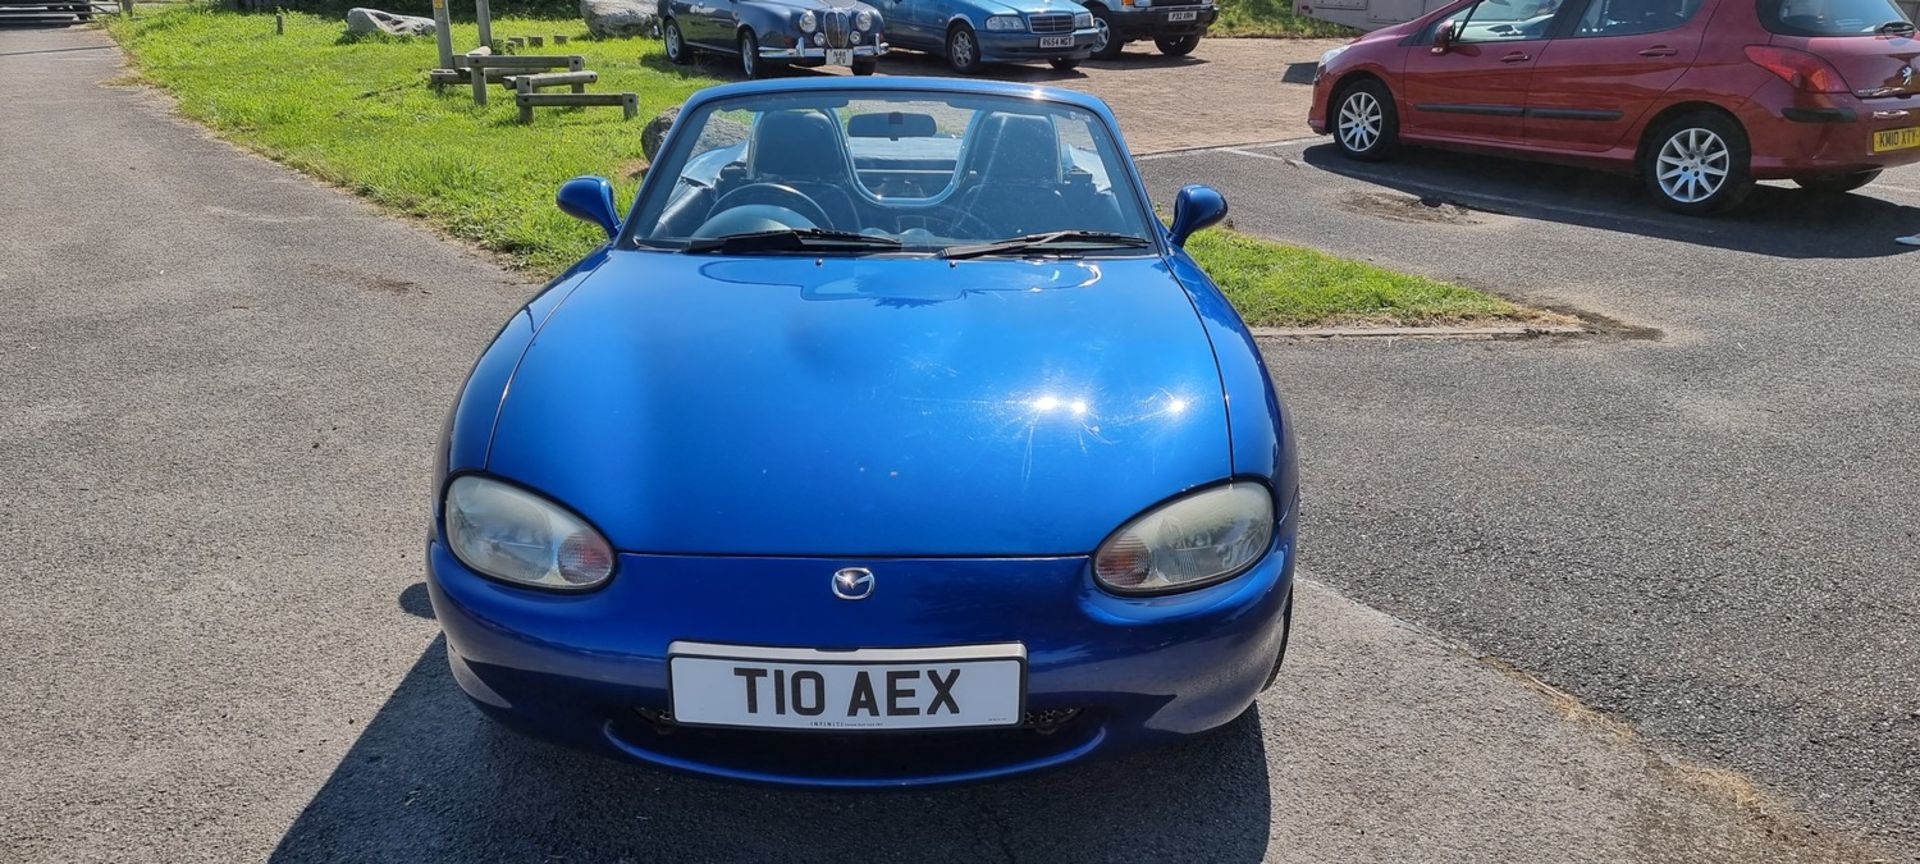 1999 Mazda MX5 10th Anniversary, 1800cc. Registration number T10AEX. Chassis number - Image 3 of 16